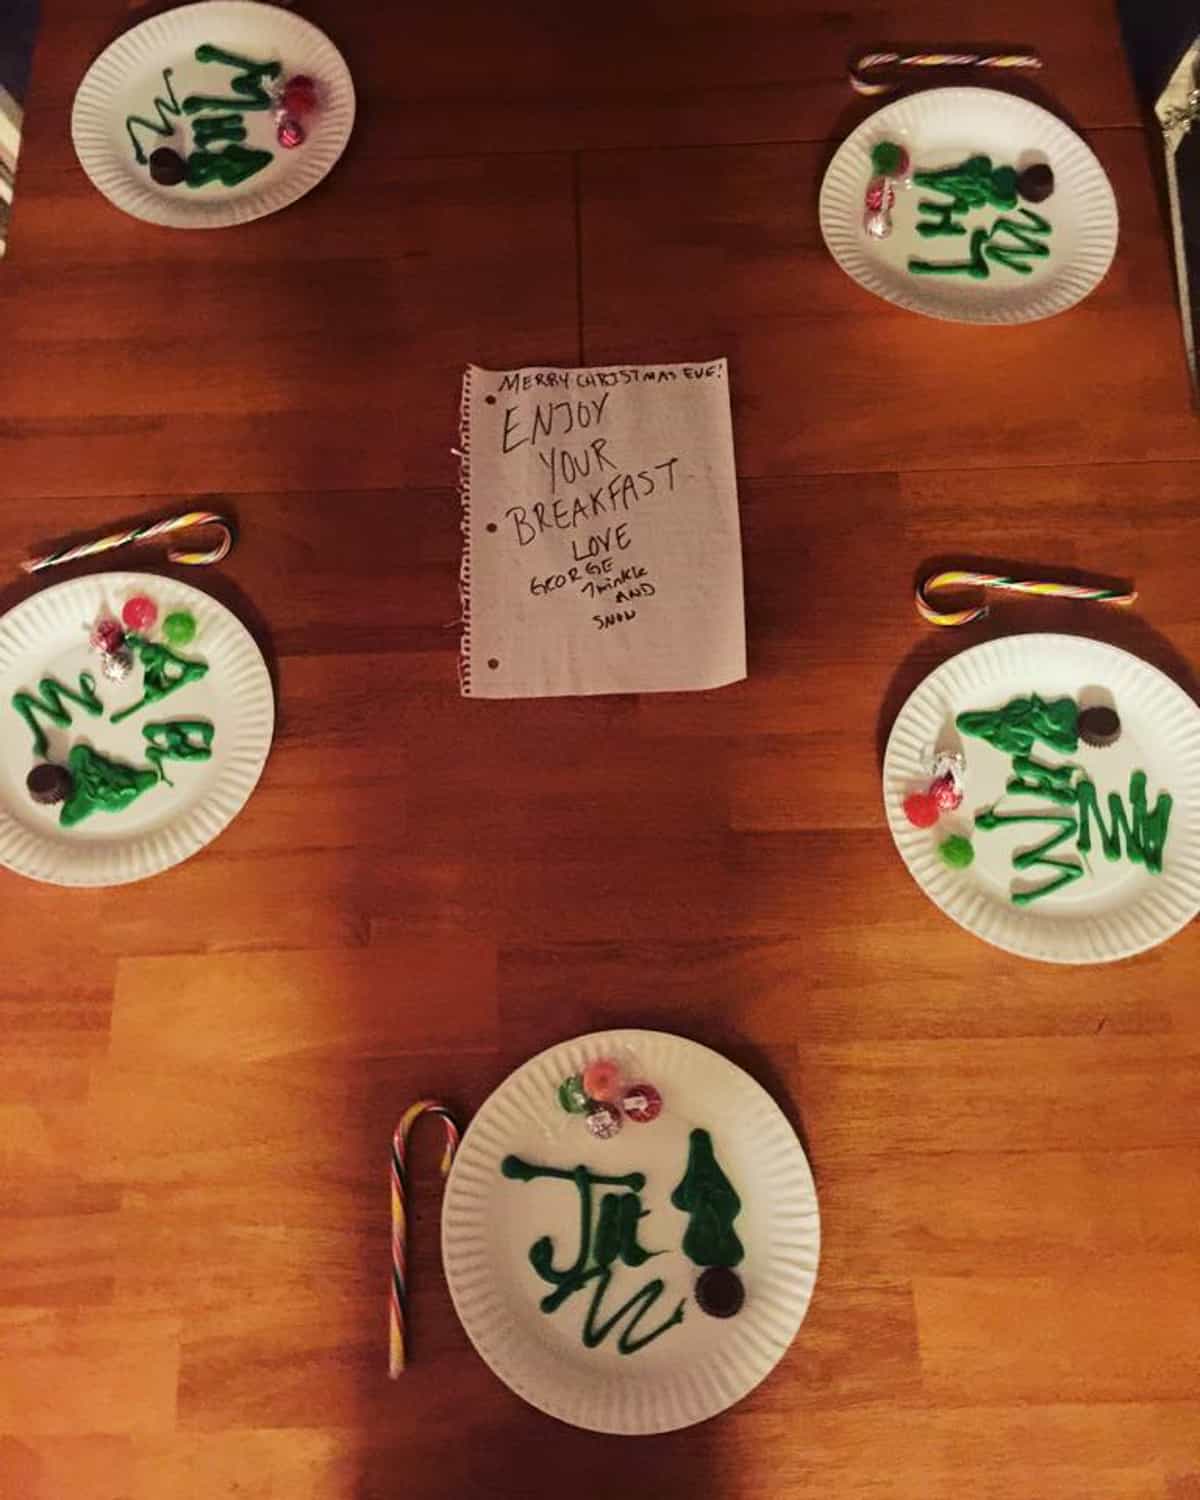 A table full of paper plates with christmas decorations on them.